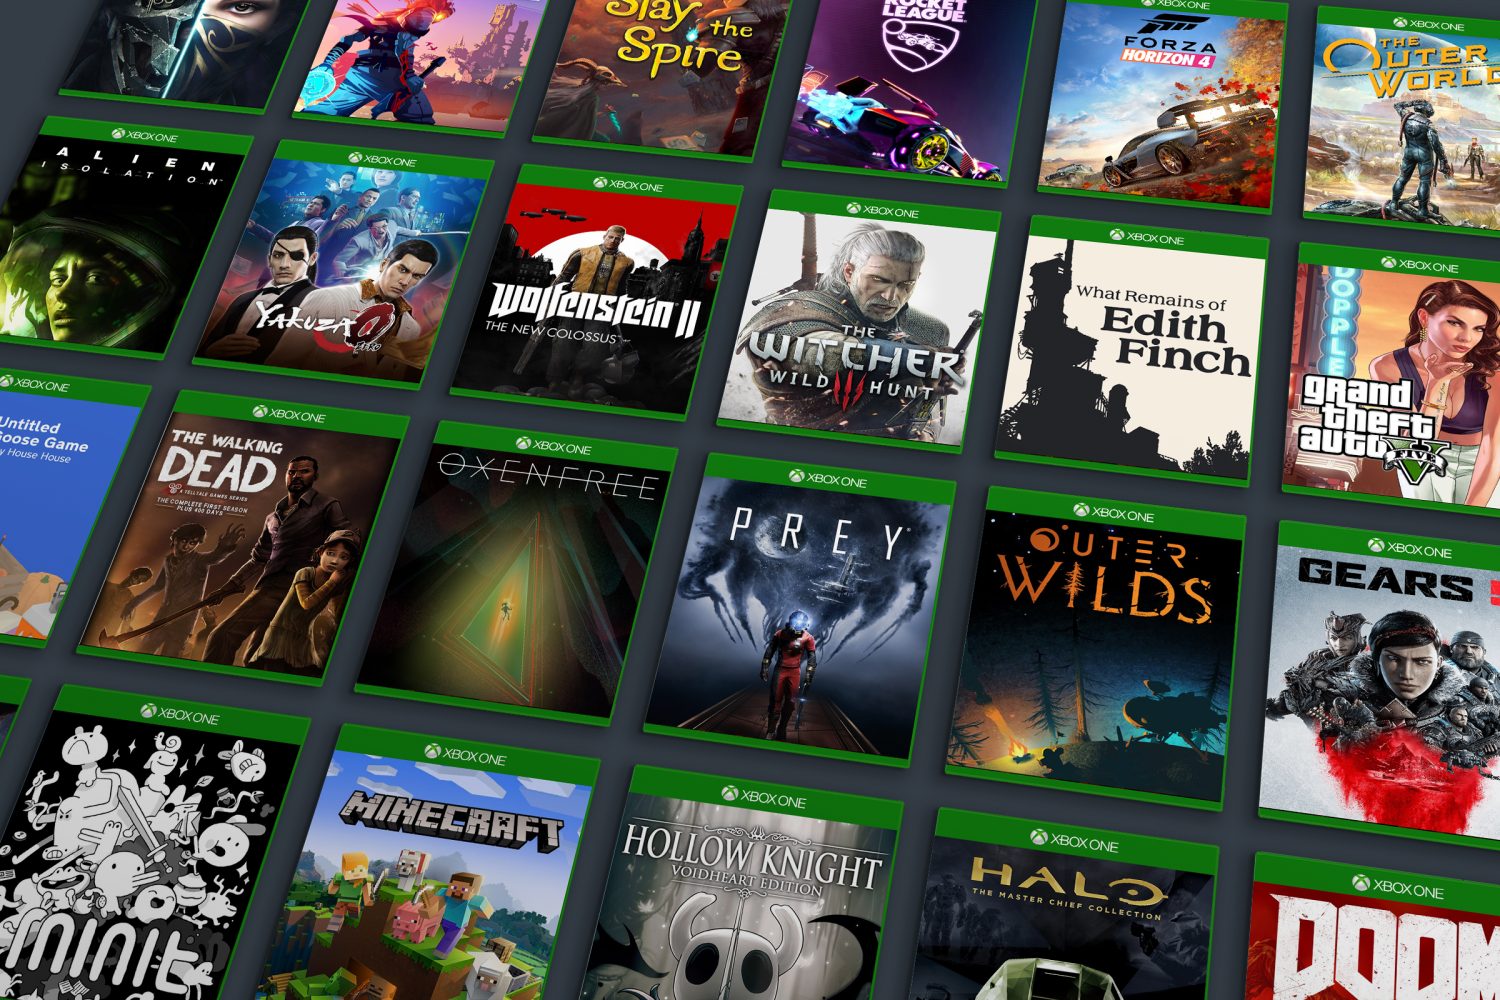 annual cost of xbox game pass